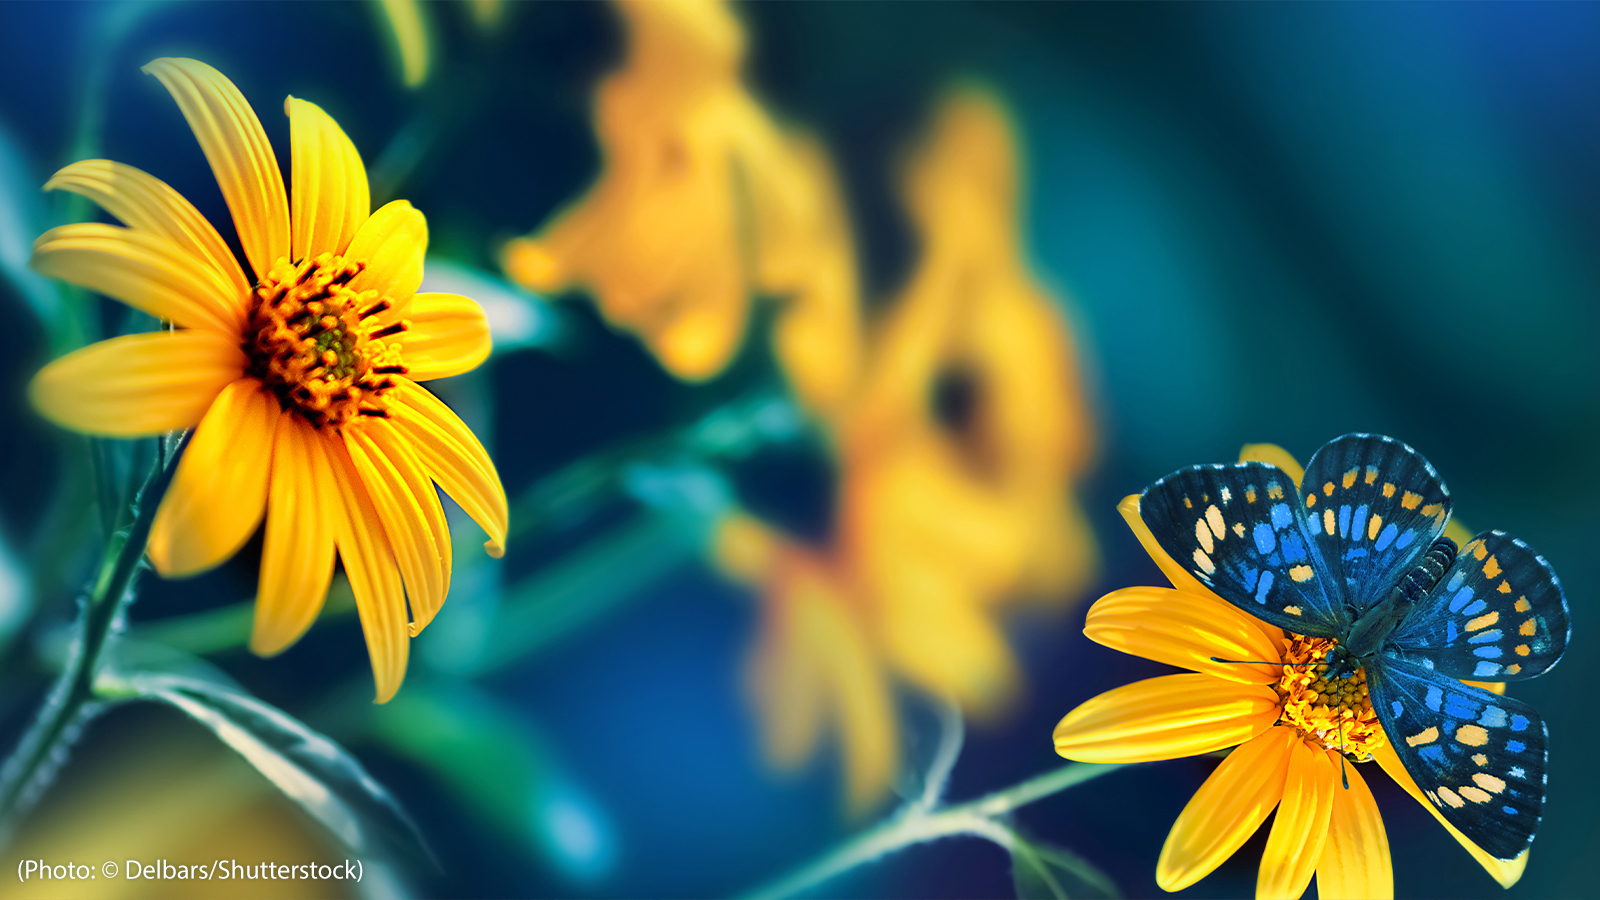 Small yellow bright summer flowers and tropical butterflies are pictured on a background of blue and green foliage in a garden.